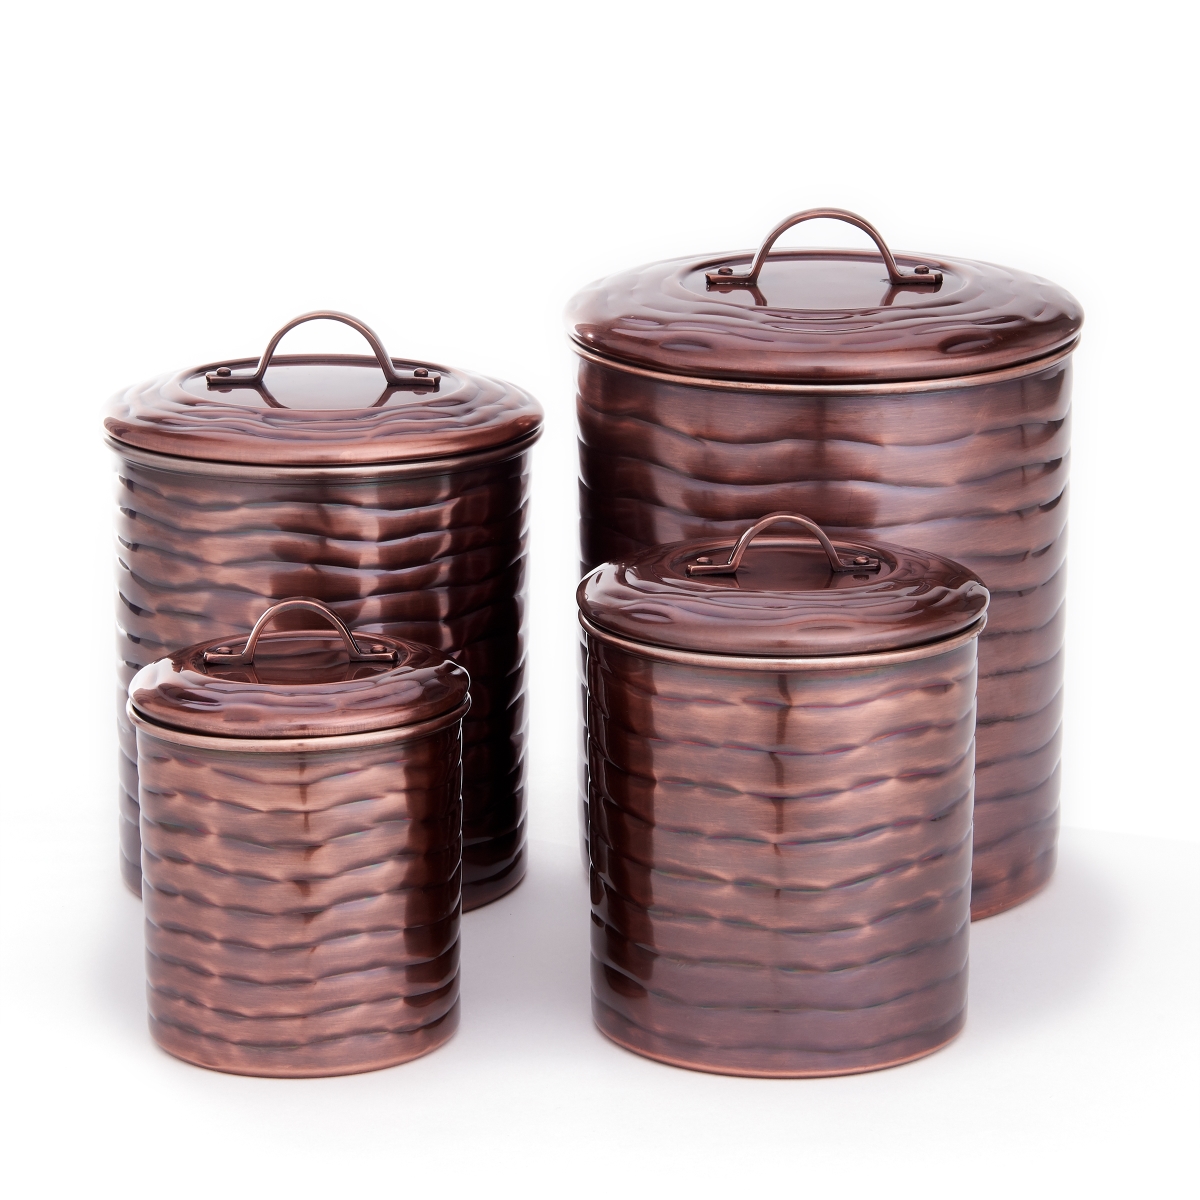 2143ac 1-4 Qt. Wave Canister Set With Fresh Seal Covers, Antique Copper - 4 Piece